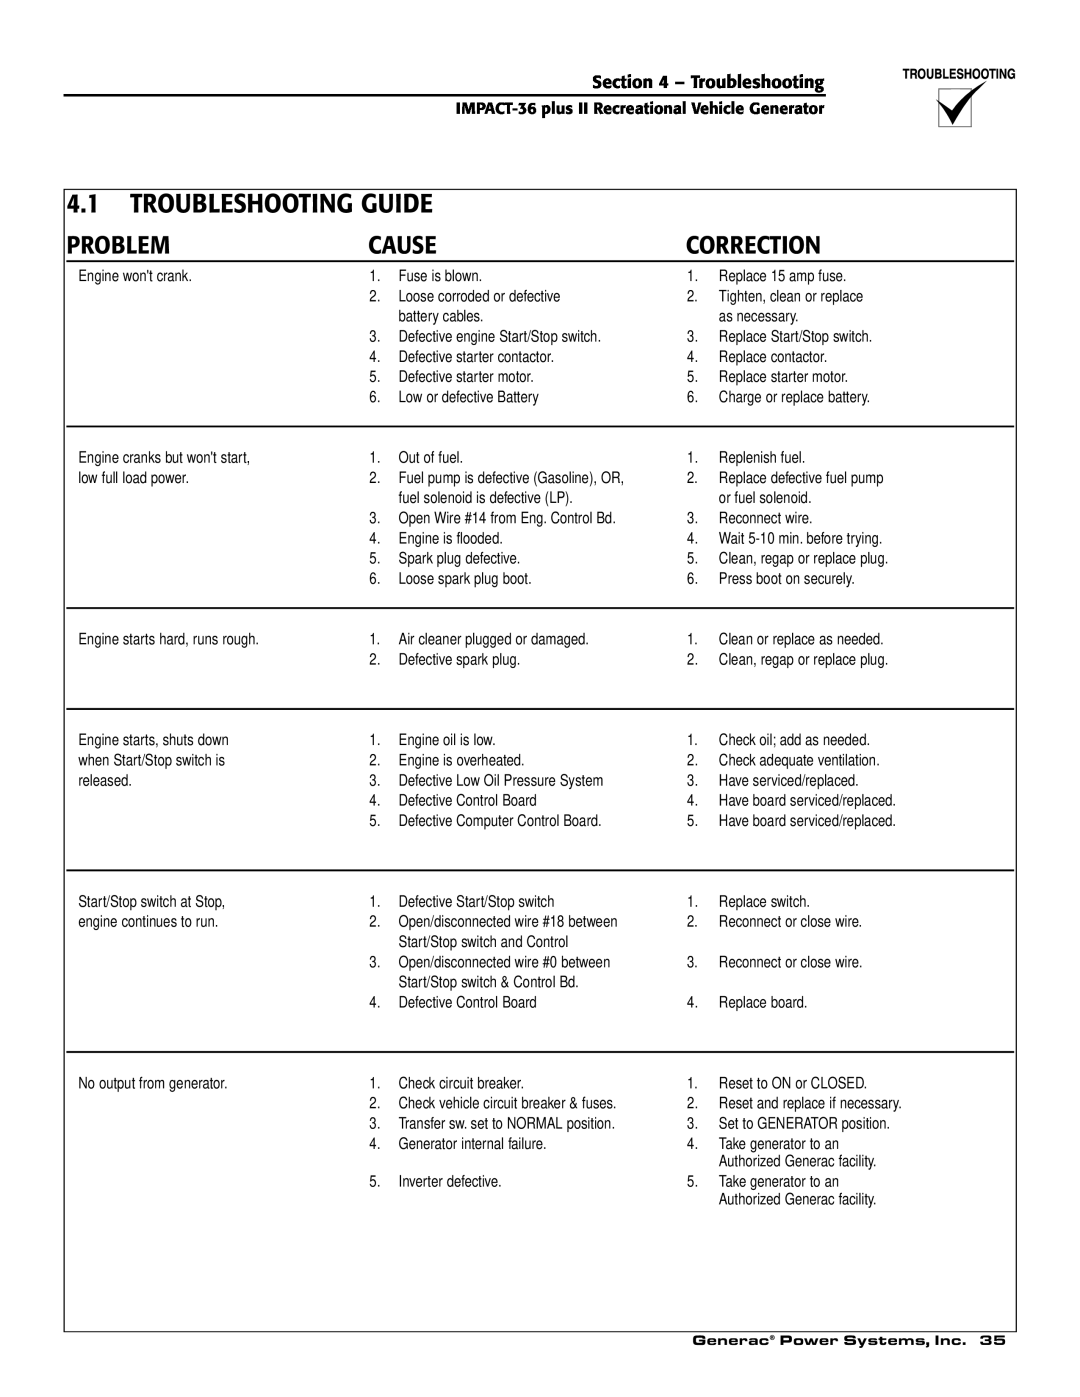 Generac 00941-3 owner manual 4.1TROUBLESHOOTING GUIDE, Problem, Cause, Correction, Troubleshooting 